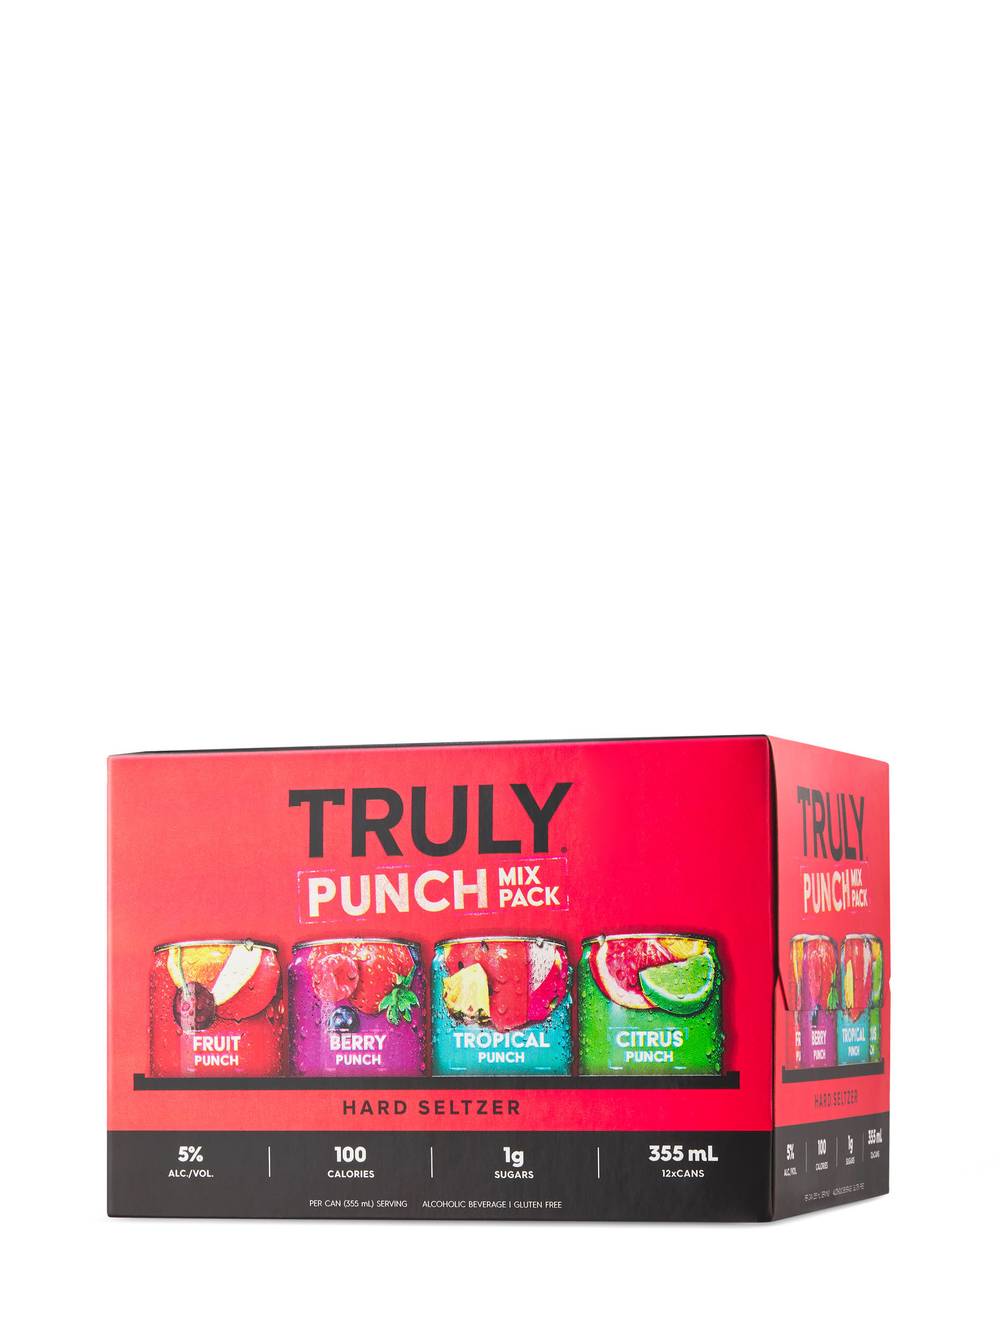 Truly Punch Mixed pack Hard Seltzer (4260 ml)